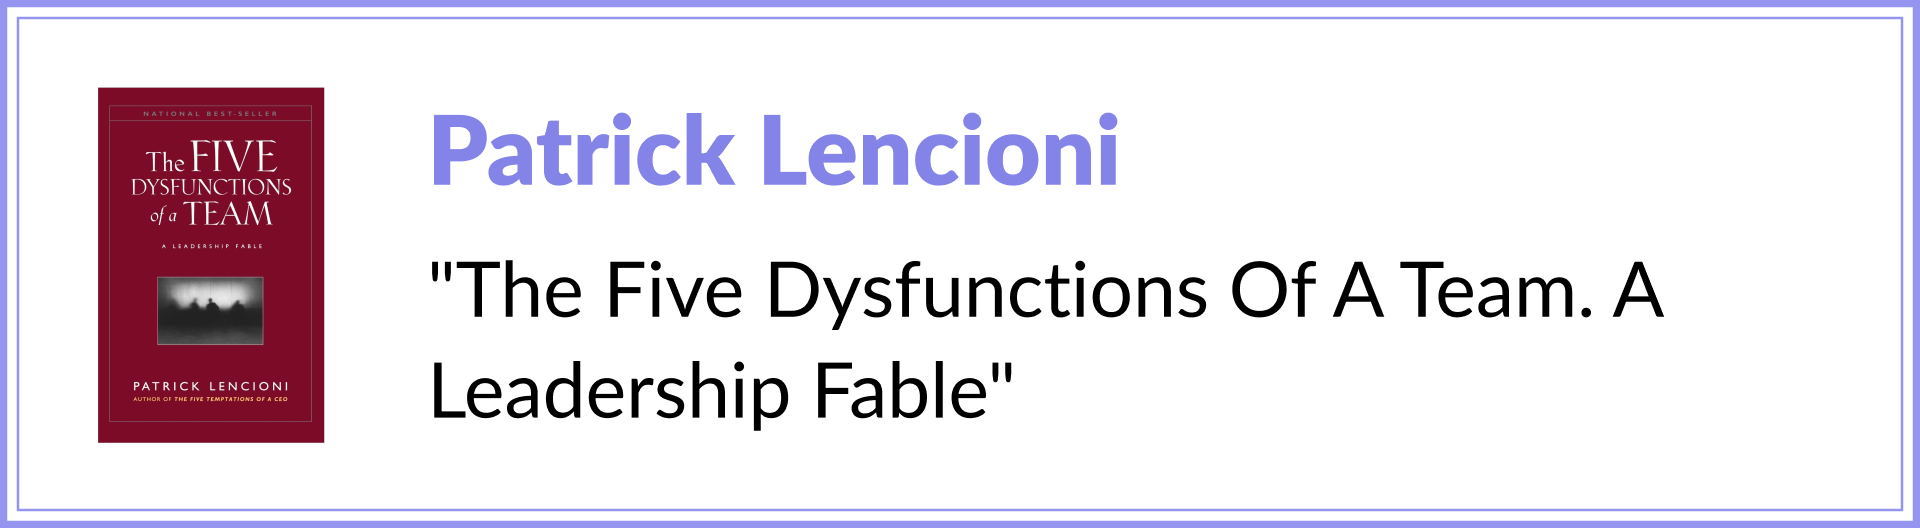 Patrick Lencioni “The Five Dysfunctions Of A Team. A Leadership Fable”